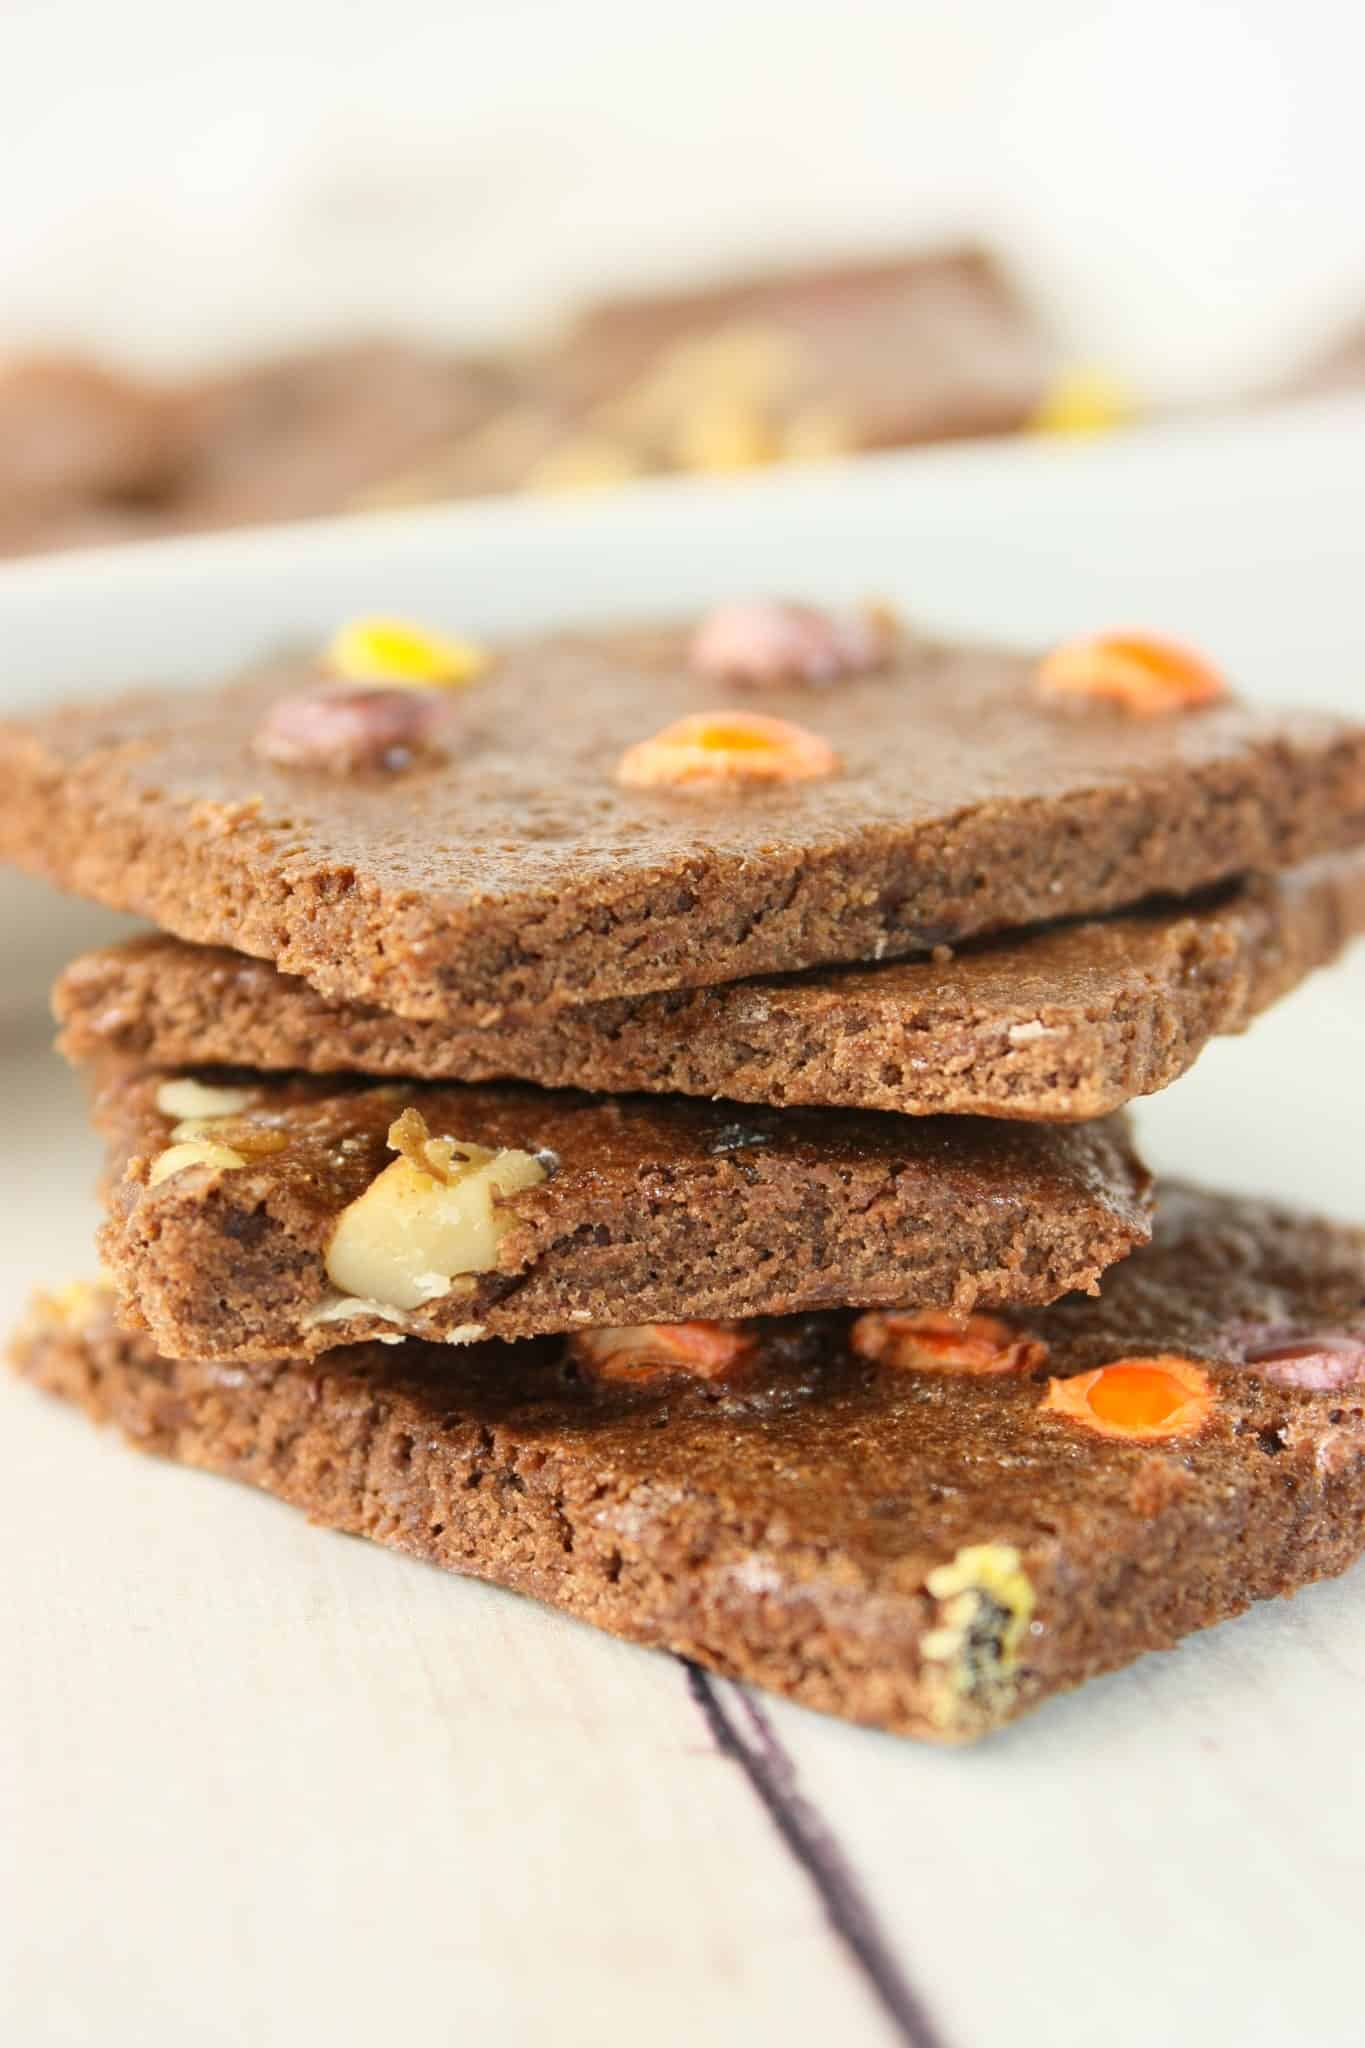 Gluten Free Brownie Brittle is a nice light, crisp snack that is loaded with chocolate flavour.  Your guest will not even notice that it is gluten free.